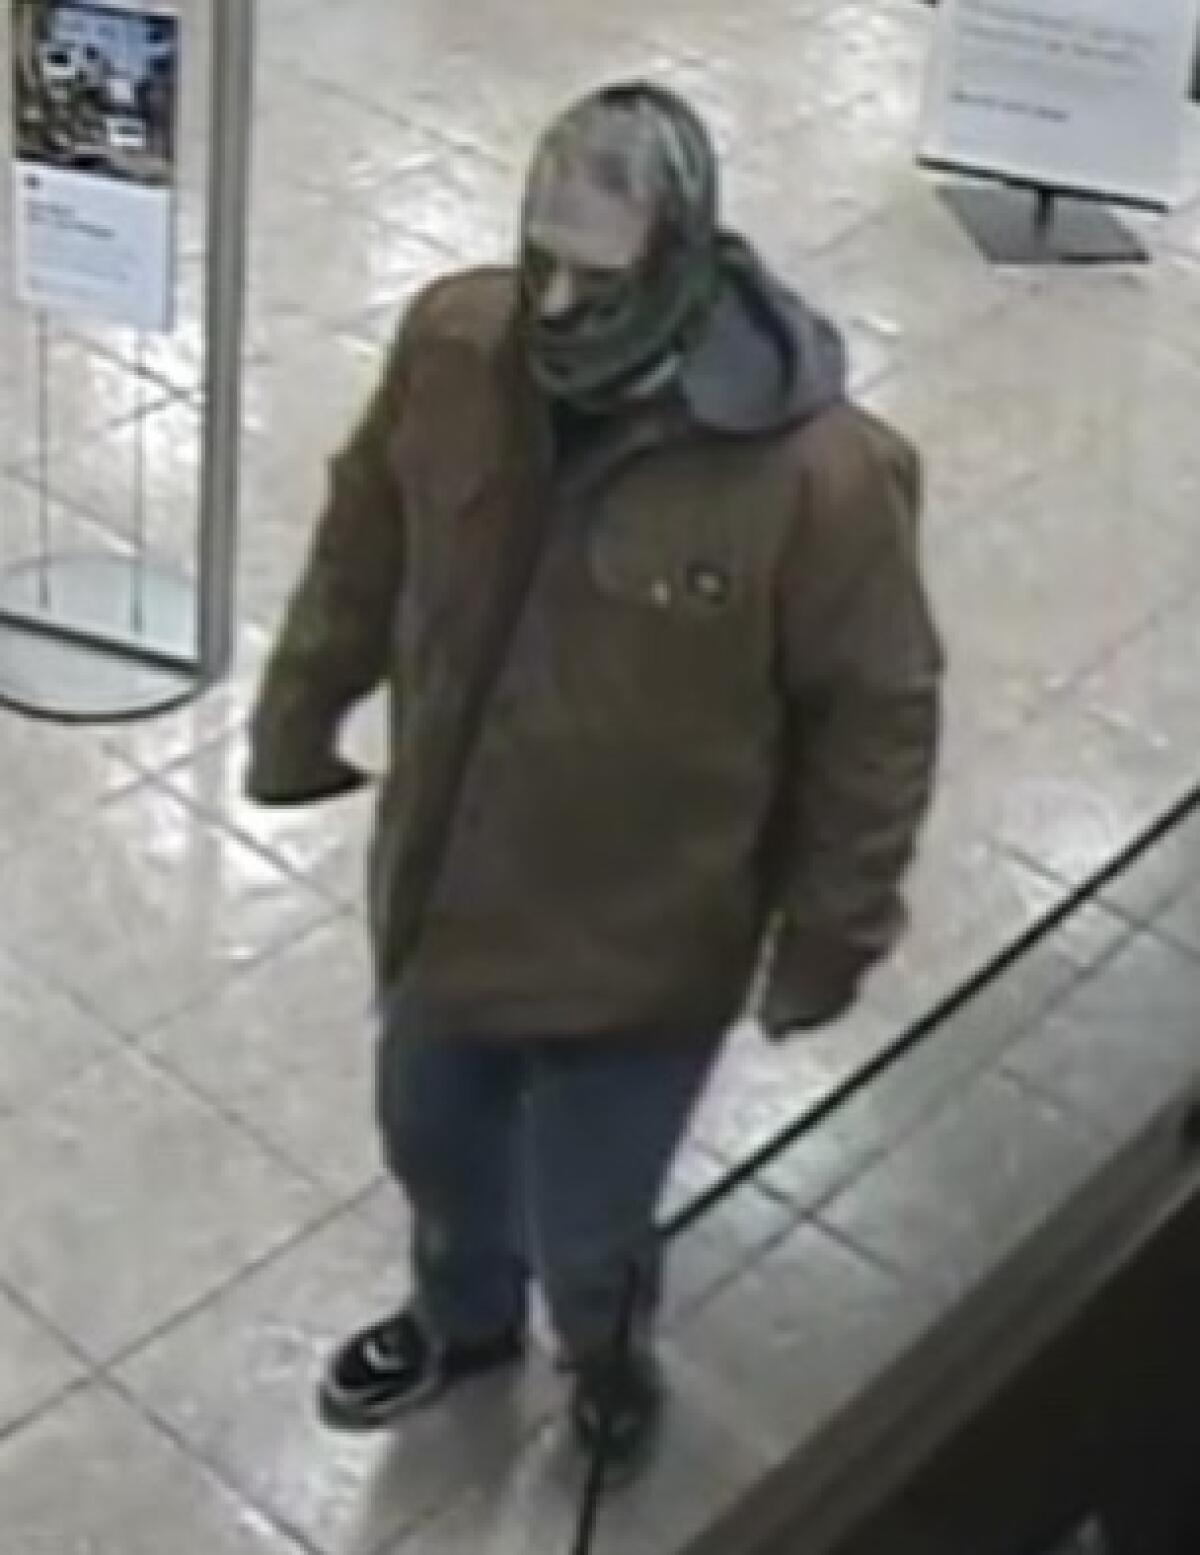 A person is shown wearing a green neck gaiter, a tan jacket, blue jeans and black sneakers.